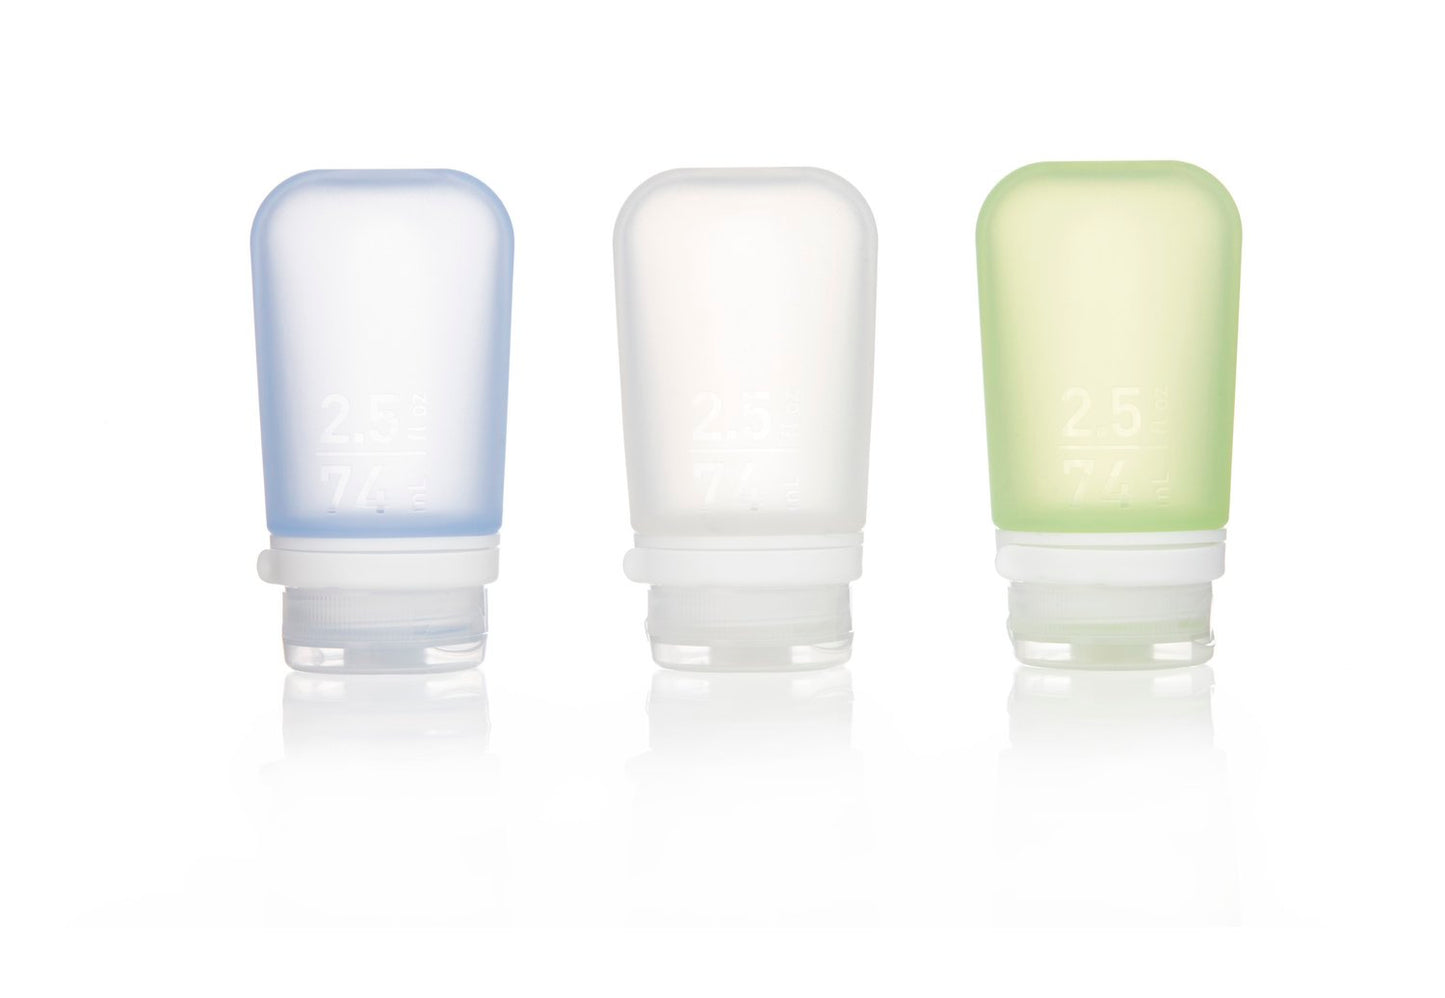 Humangear 2.5 oz GoToob+ 3-Pack Silicone 3-1-1 Toiletry Bottles (MEDIUM) - Assorted Colors